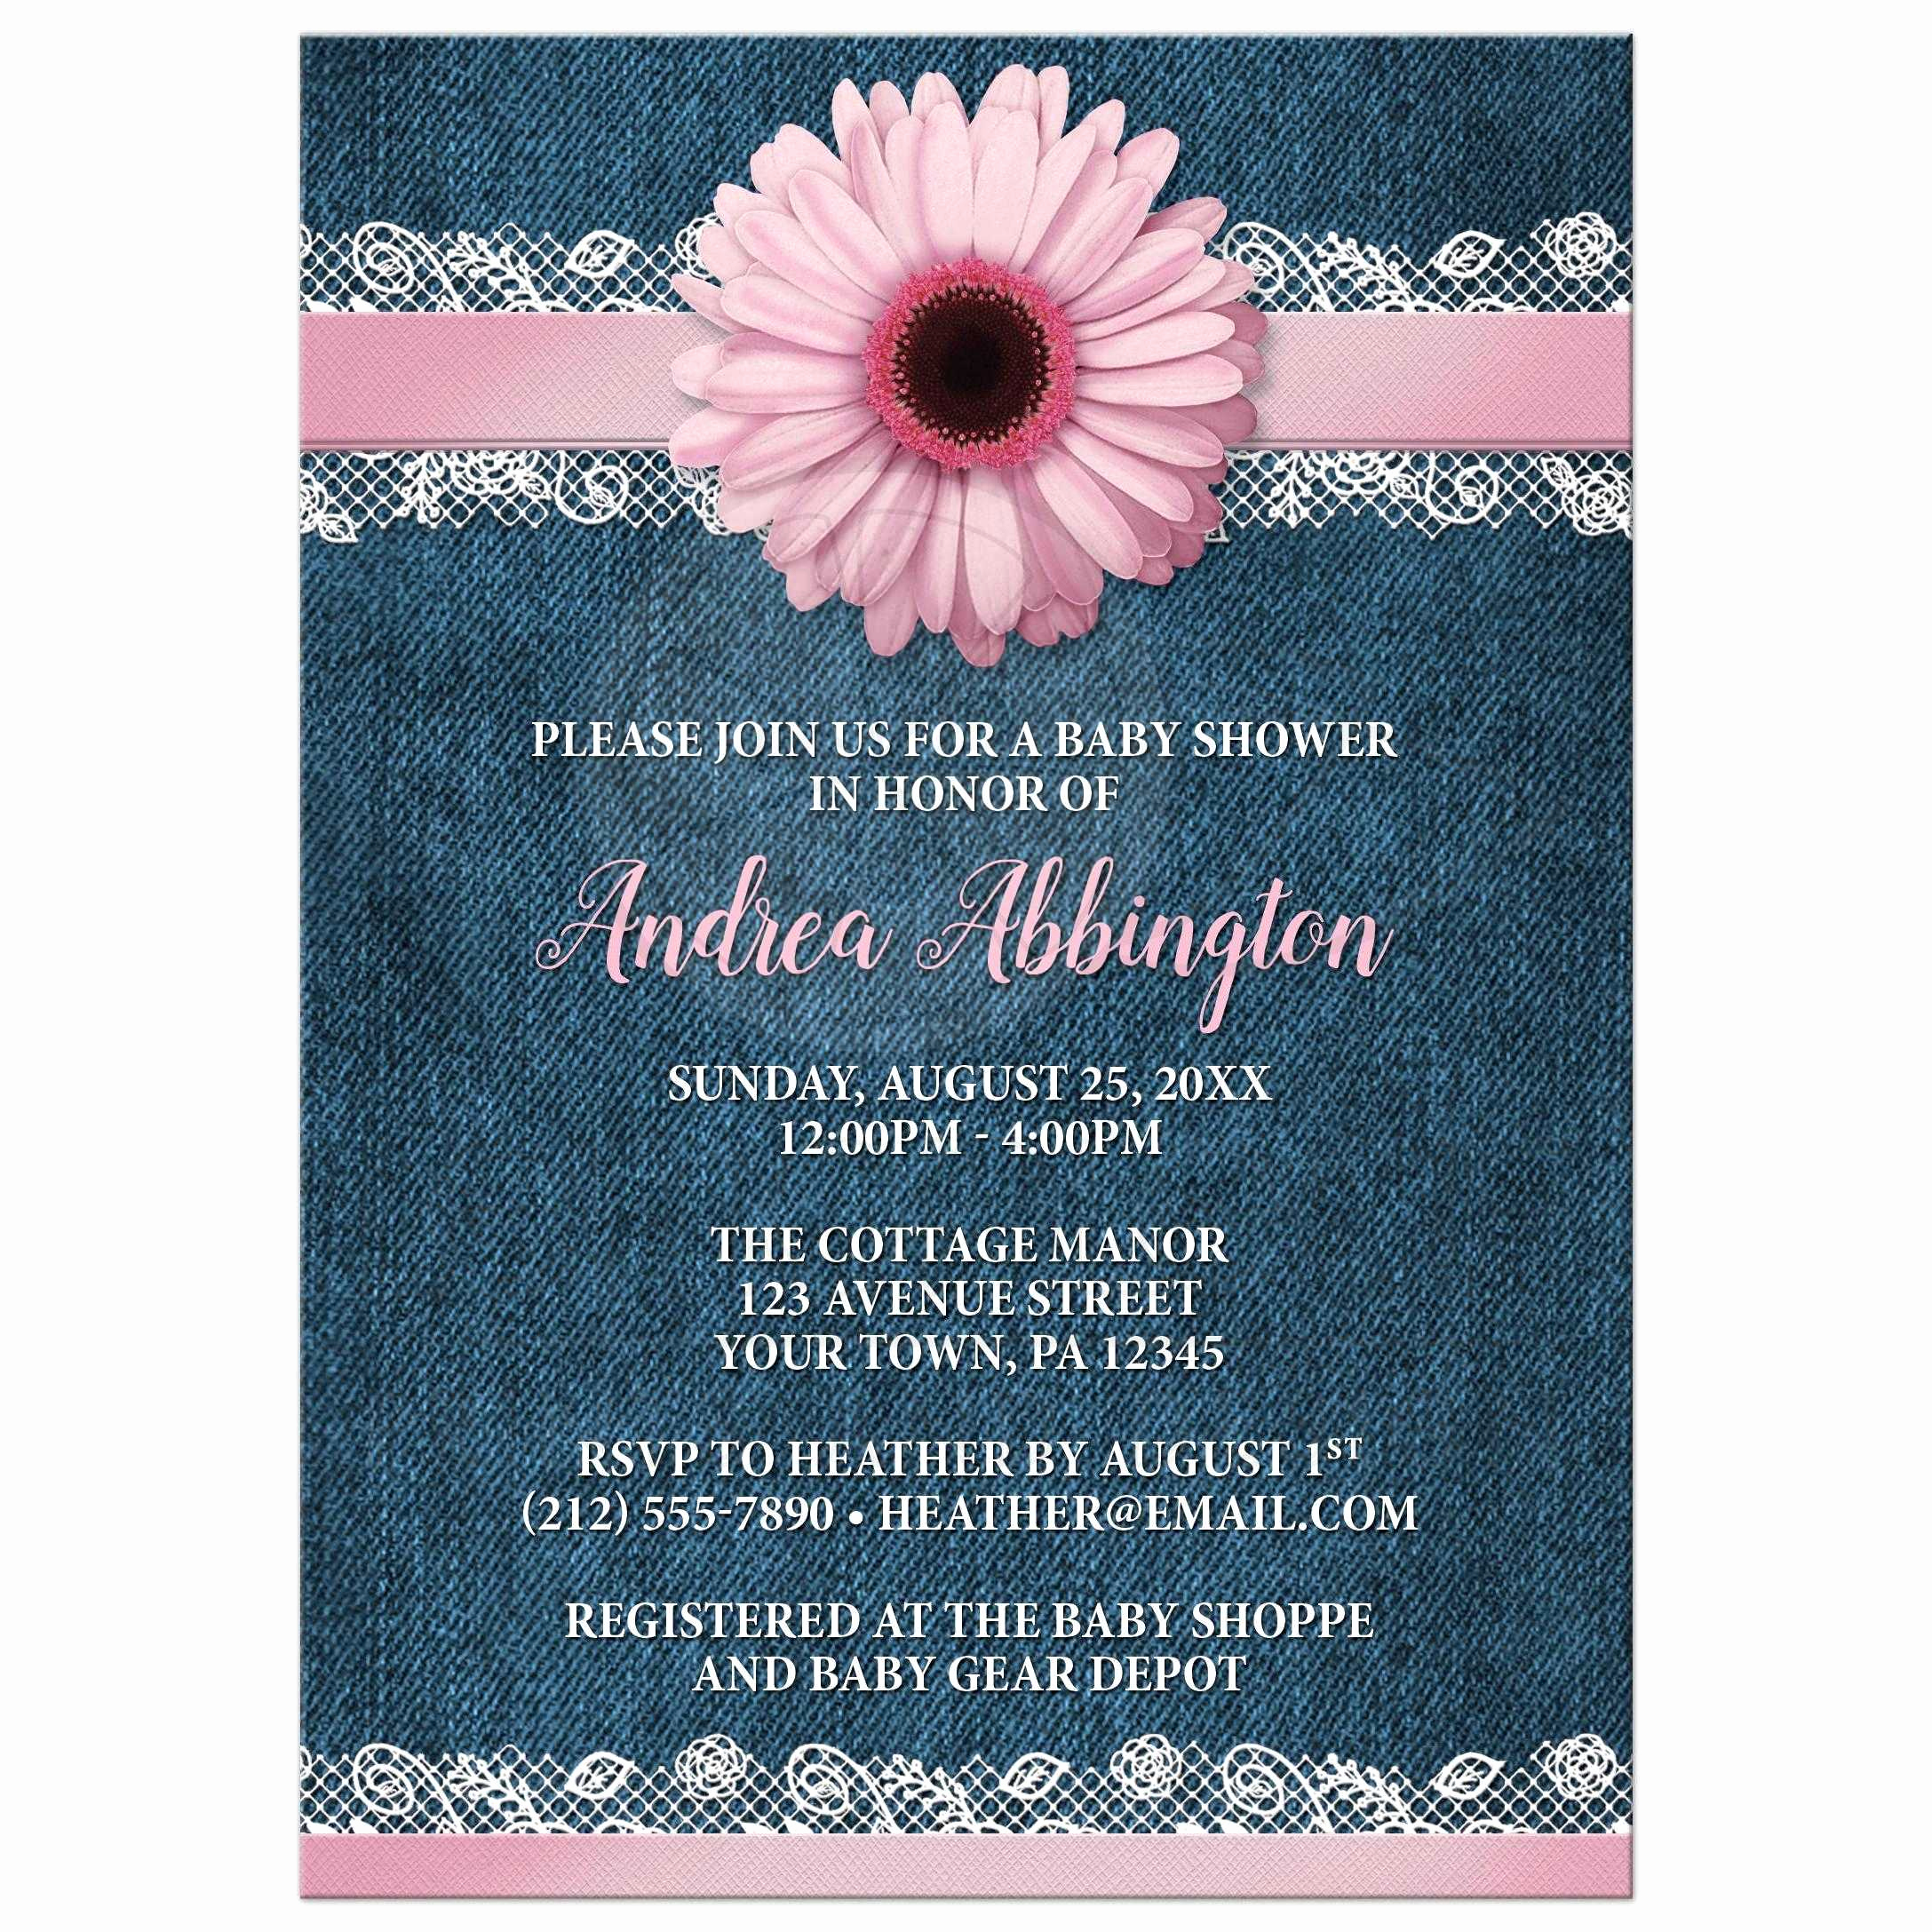 Baby Shower Invitation Images Inspirational Baby Shower Invitations Pink Daisy Lace Rustic Denim